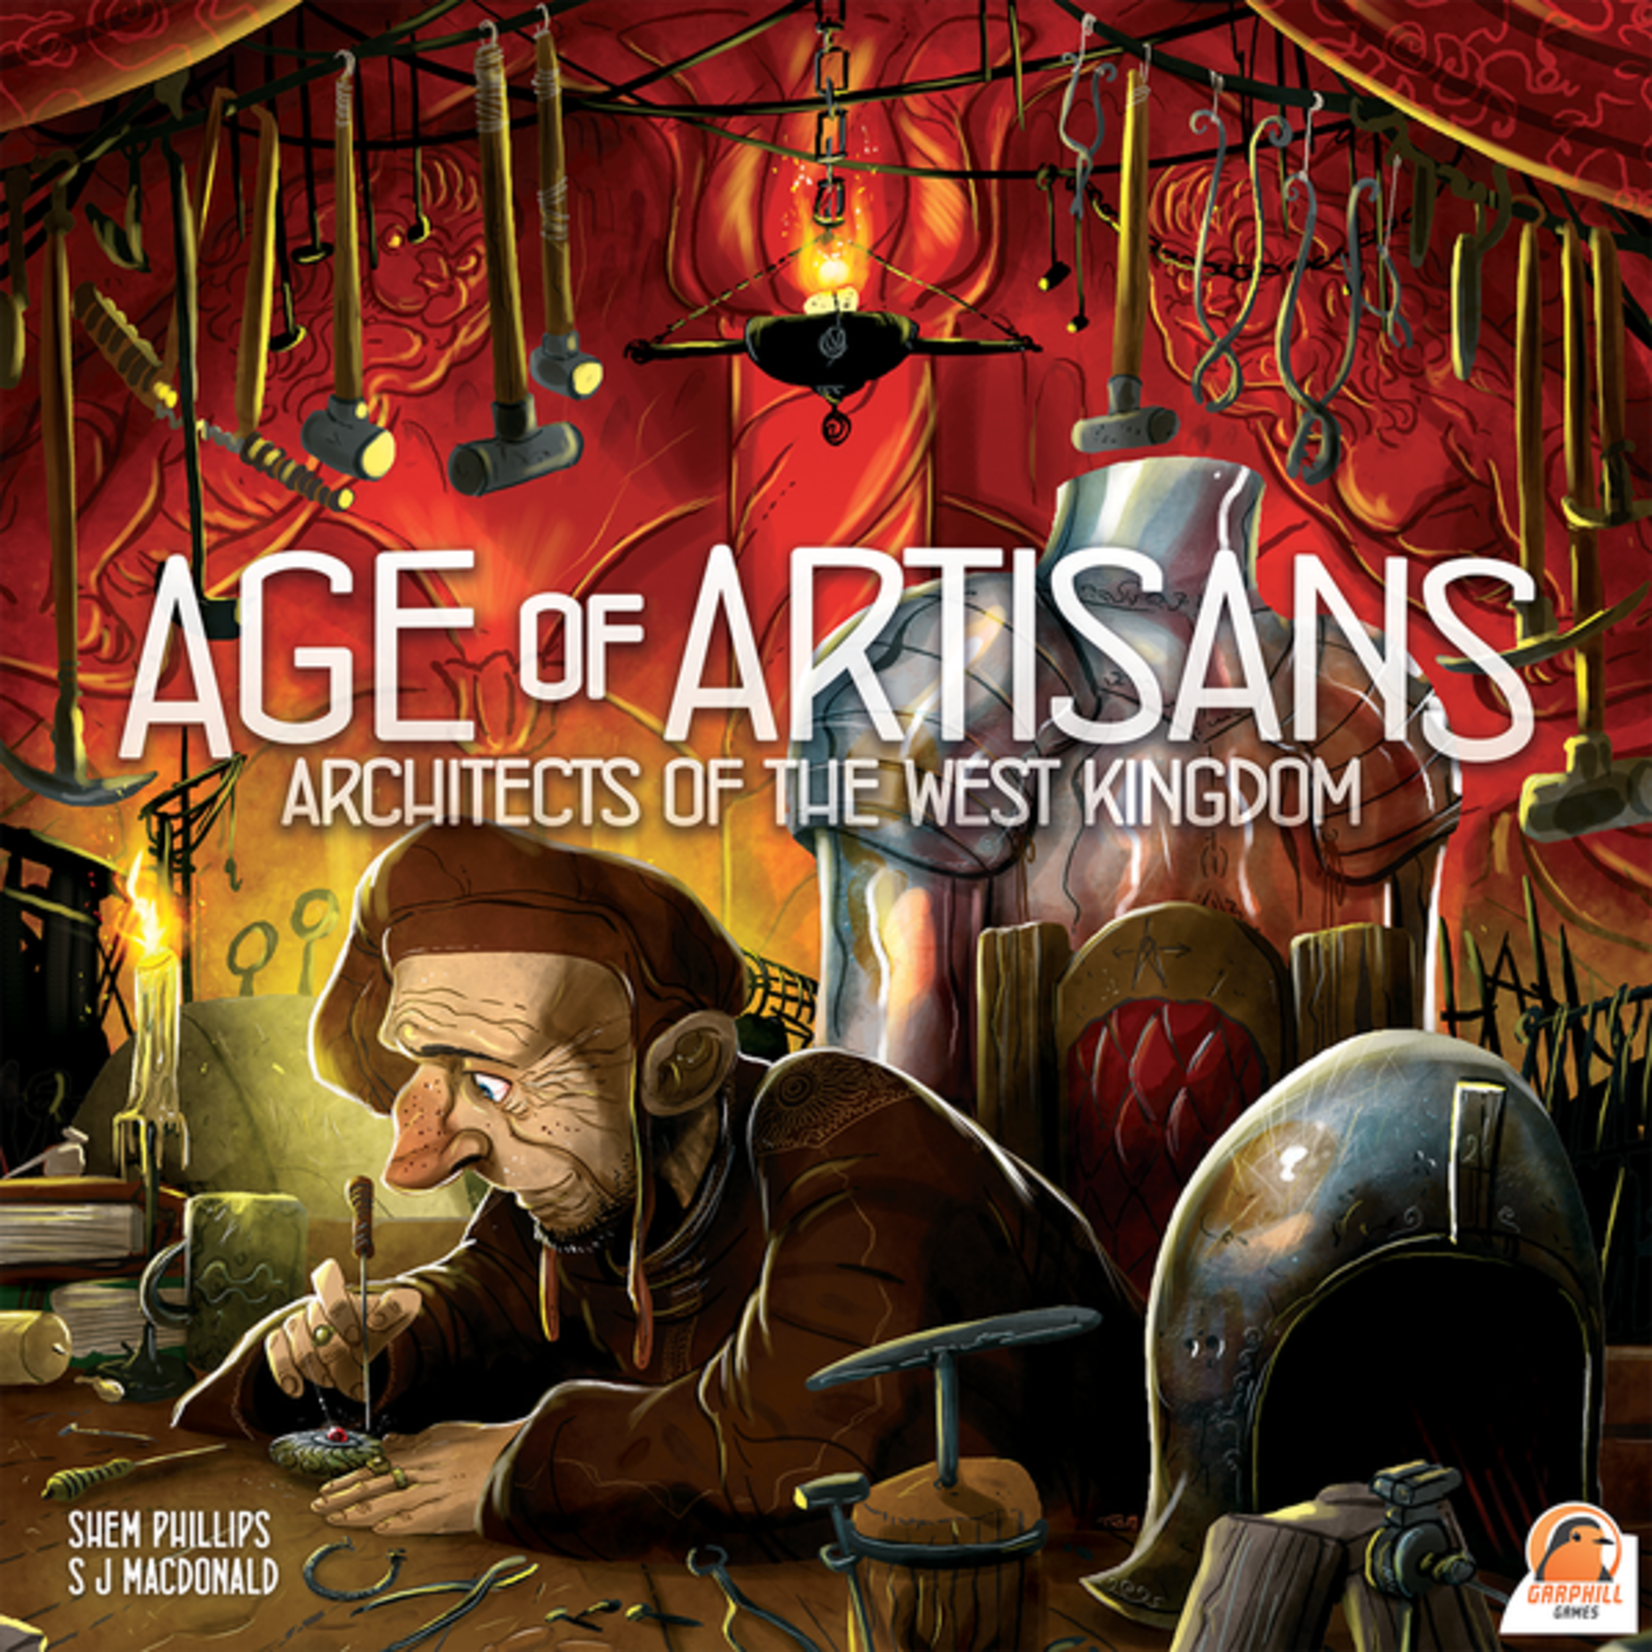 Renegade Game Studios Architects of the West Kingdom: Age of Artisans Expansion